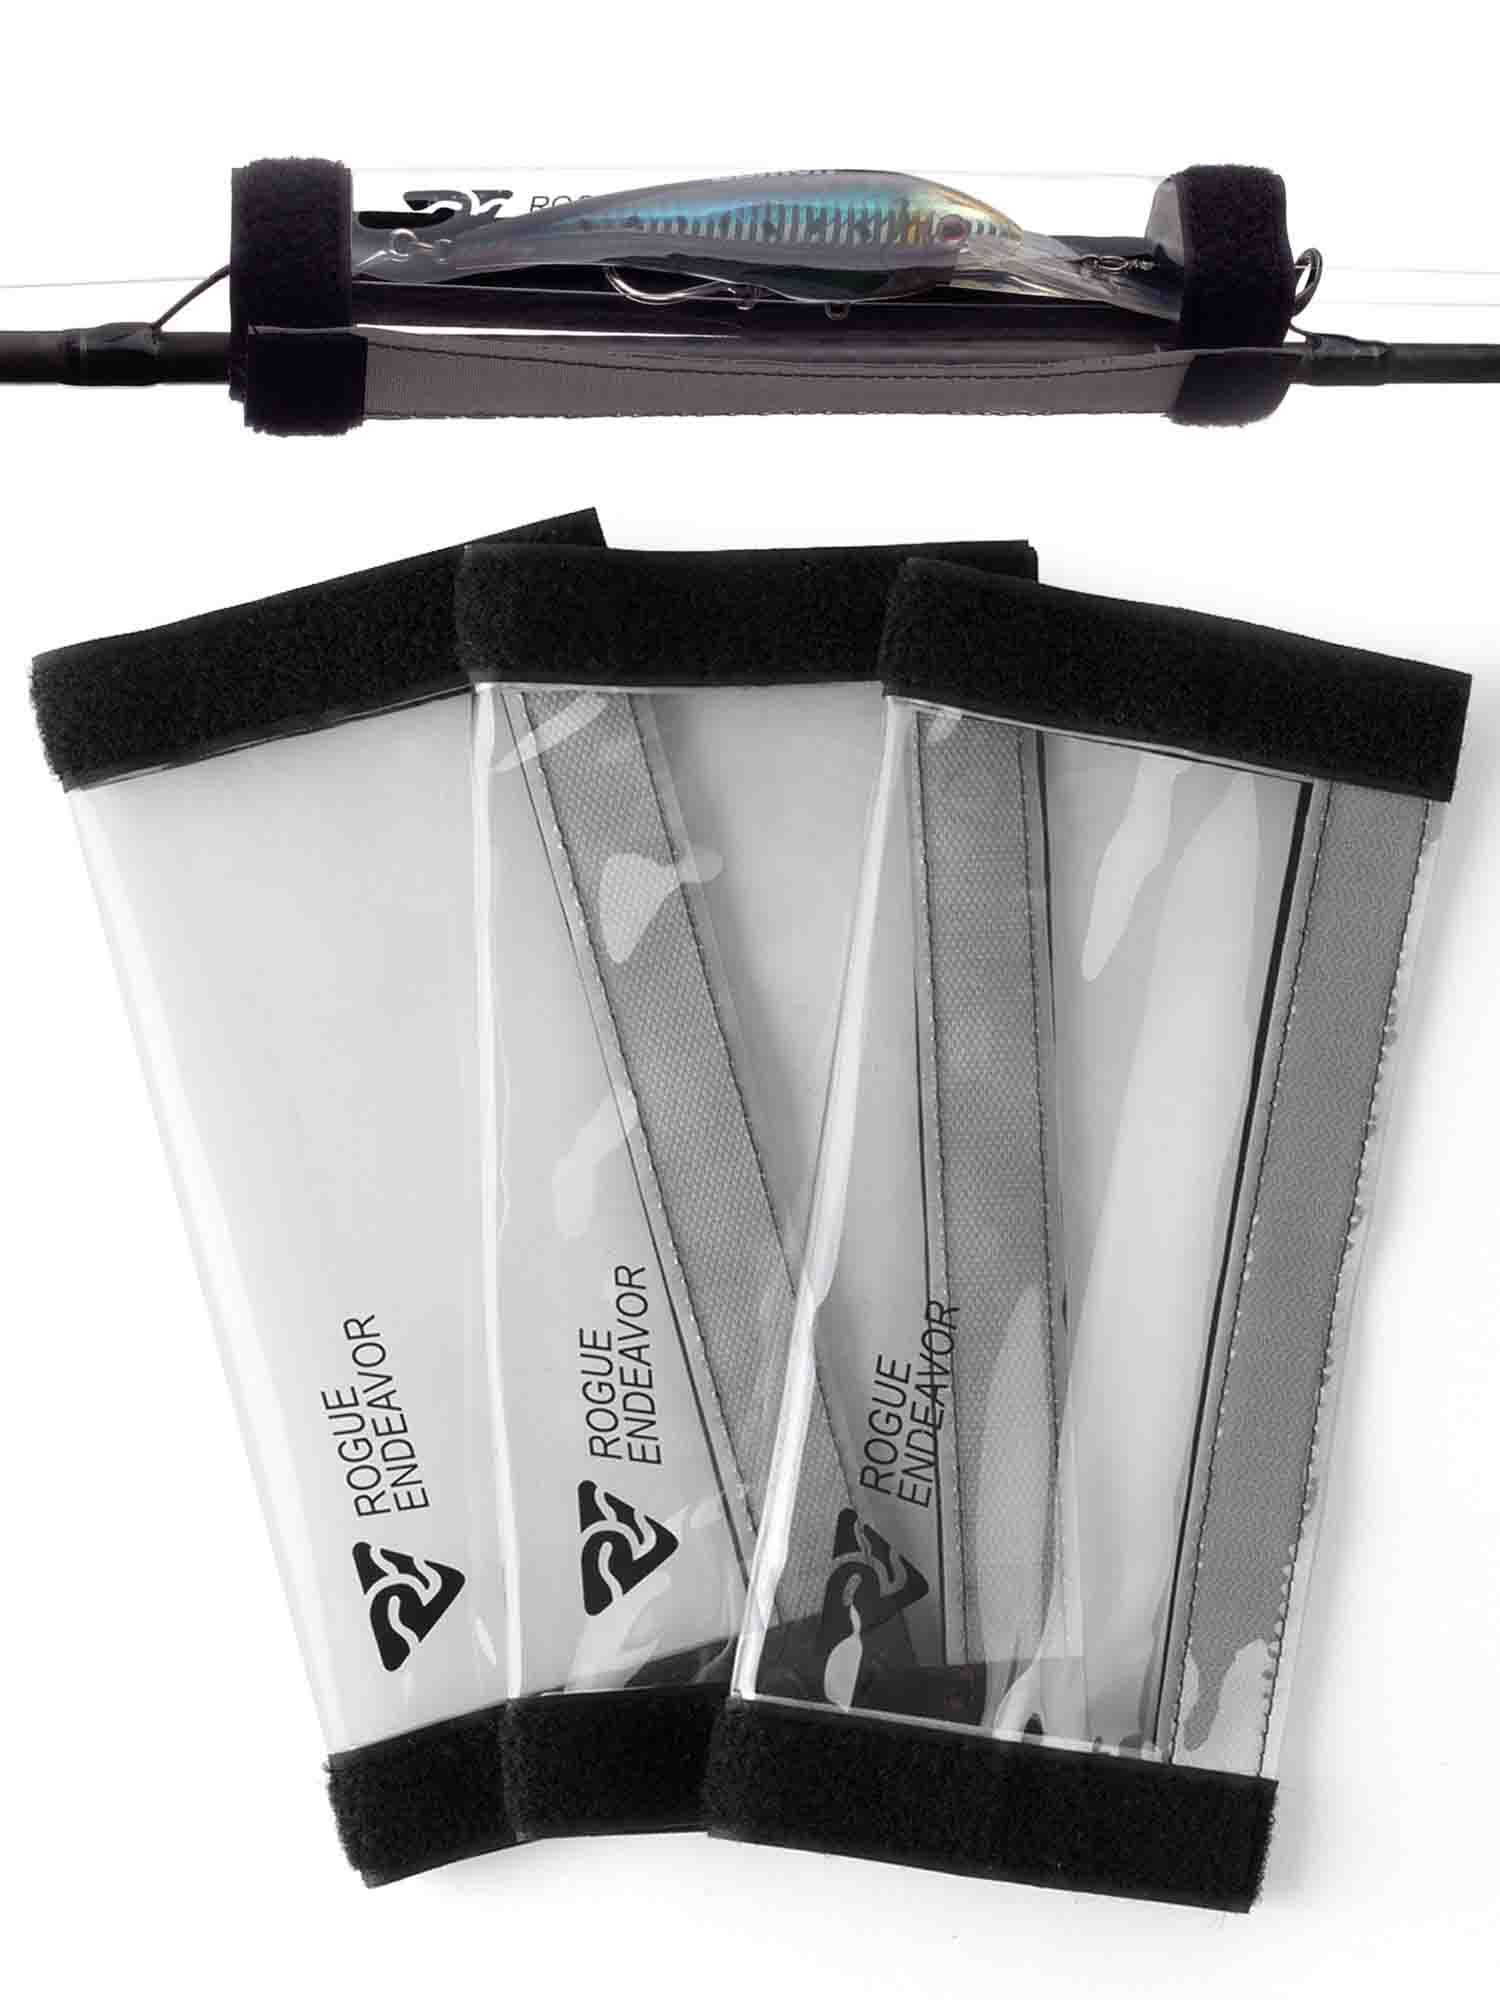 Rodeel Fishing Lure Wraps 4 Packs Clear PVC Lure Covers, with Hook Bonnets,  Keeps Children, Pets and Fishermen Safe from Sharp Hook, Large Size: 8.5